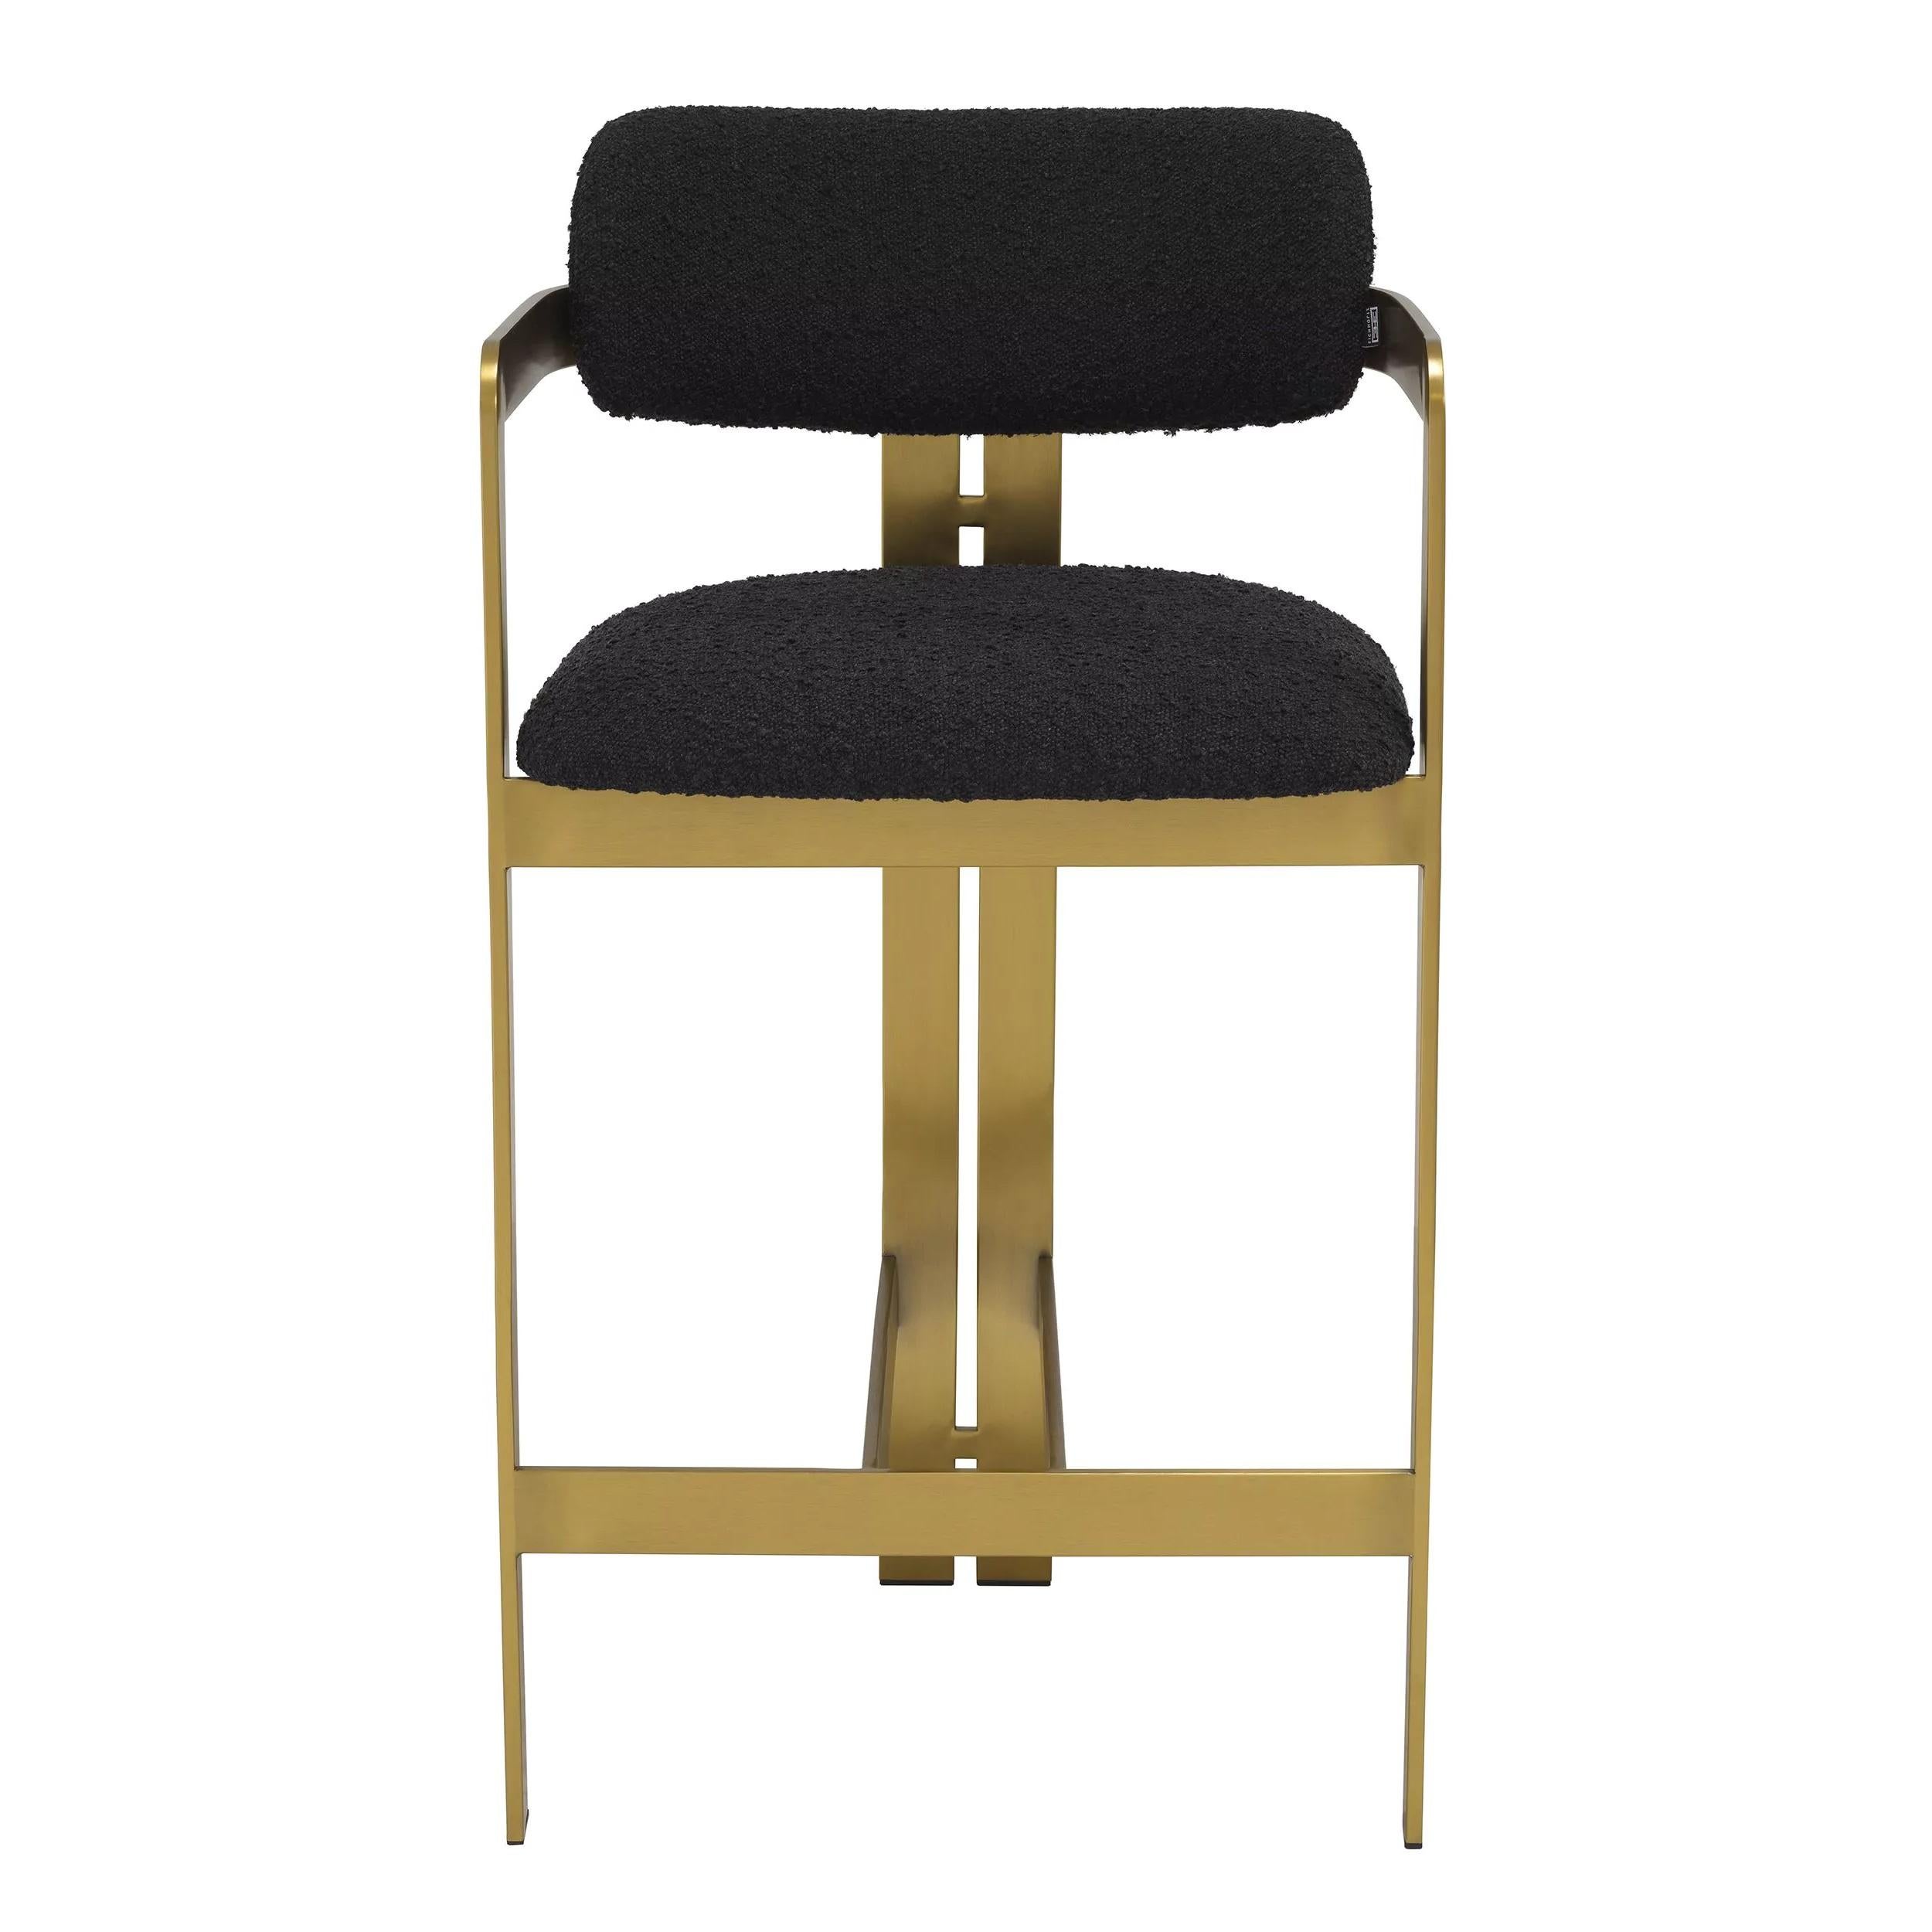 Counter bar stool in bouclé fabric and brass finishes.